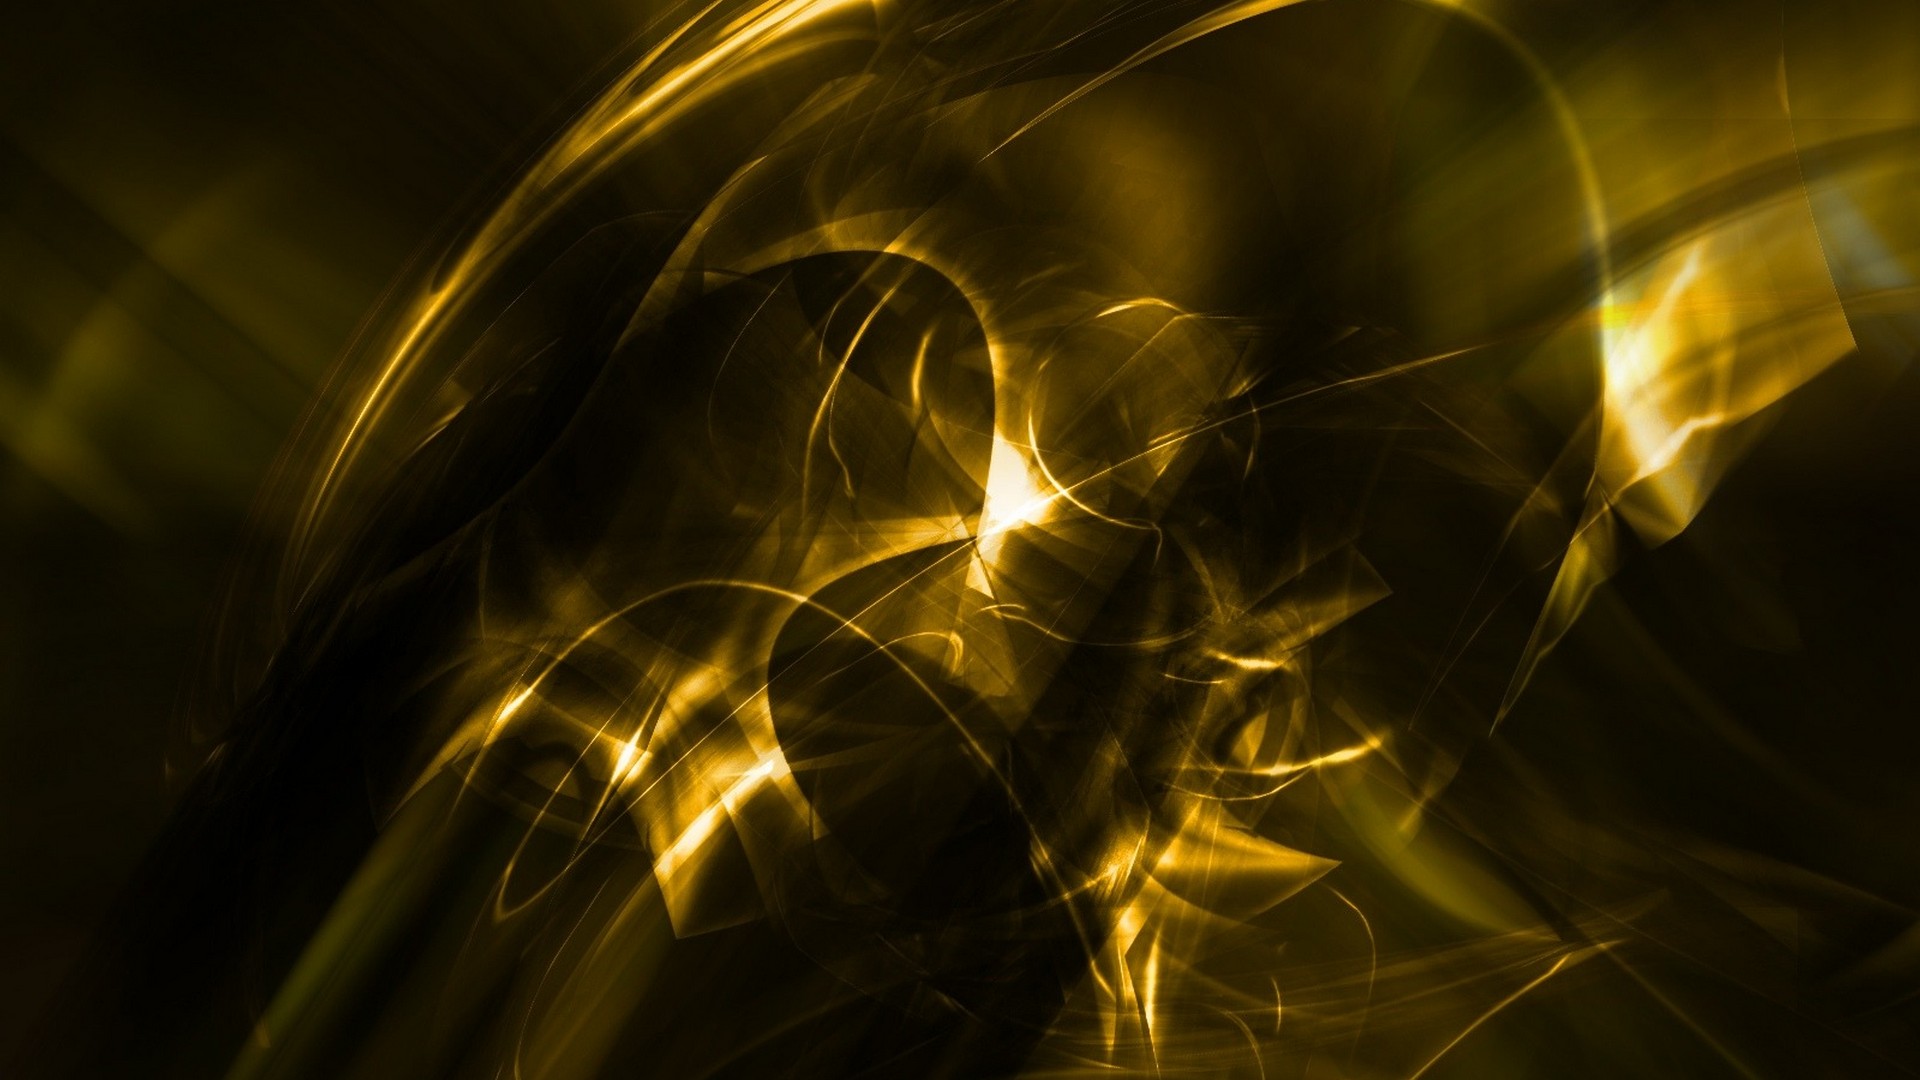 HD Black and Gold Backgrounds 1920x1080